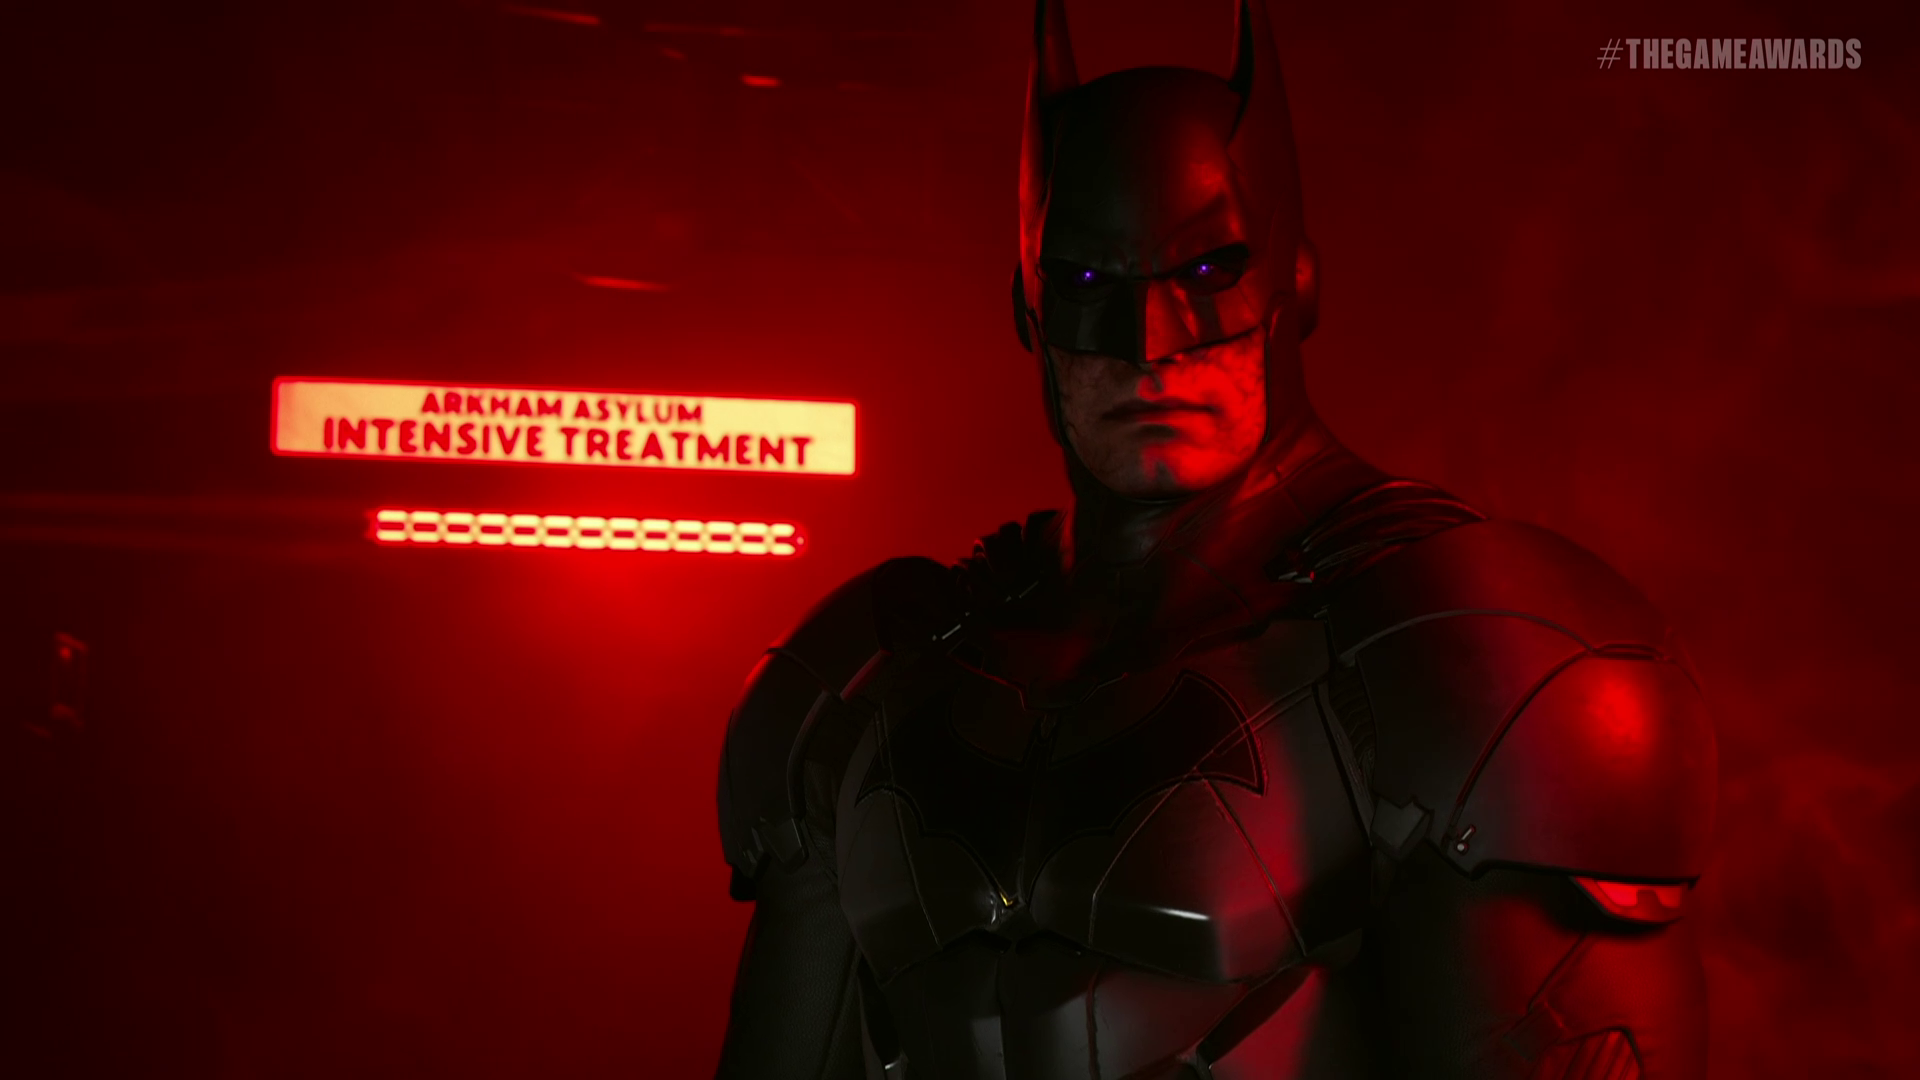 Batman lit by red light, with a sign reading “Arkham Asylum Intensive Treatment” behind him, in Suicide Squad: Kill the Justice League